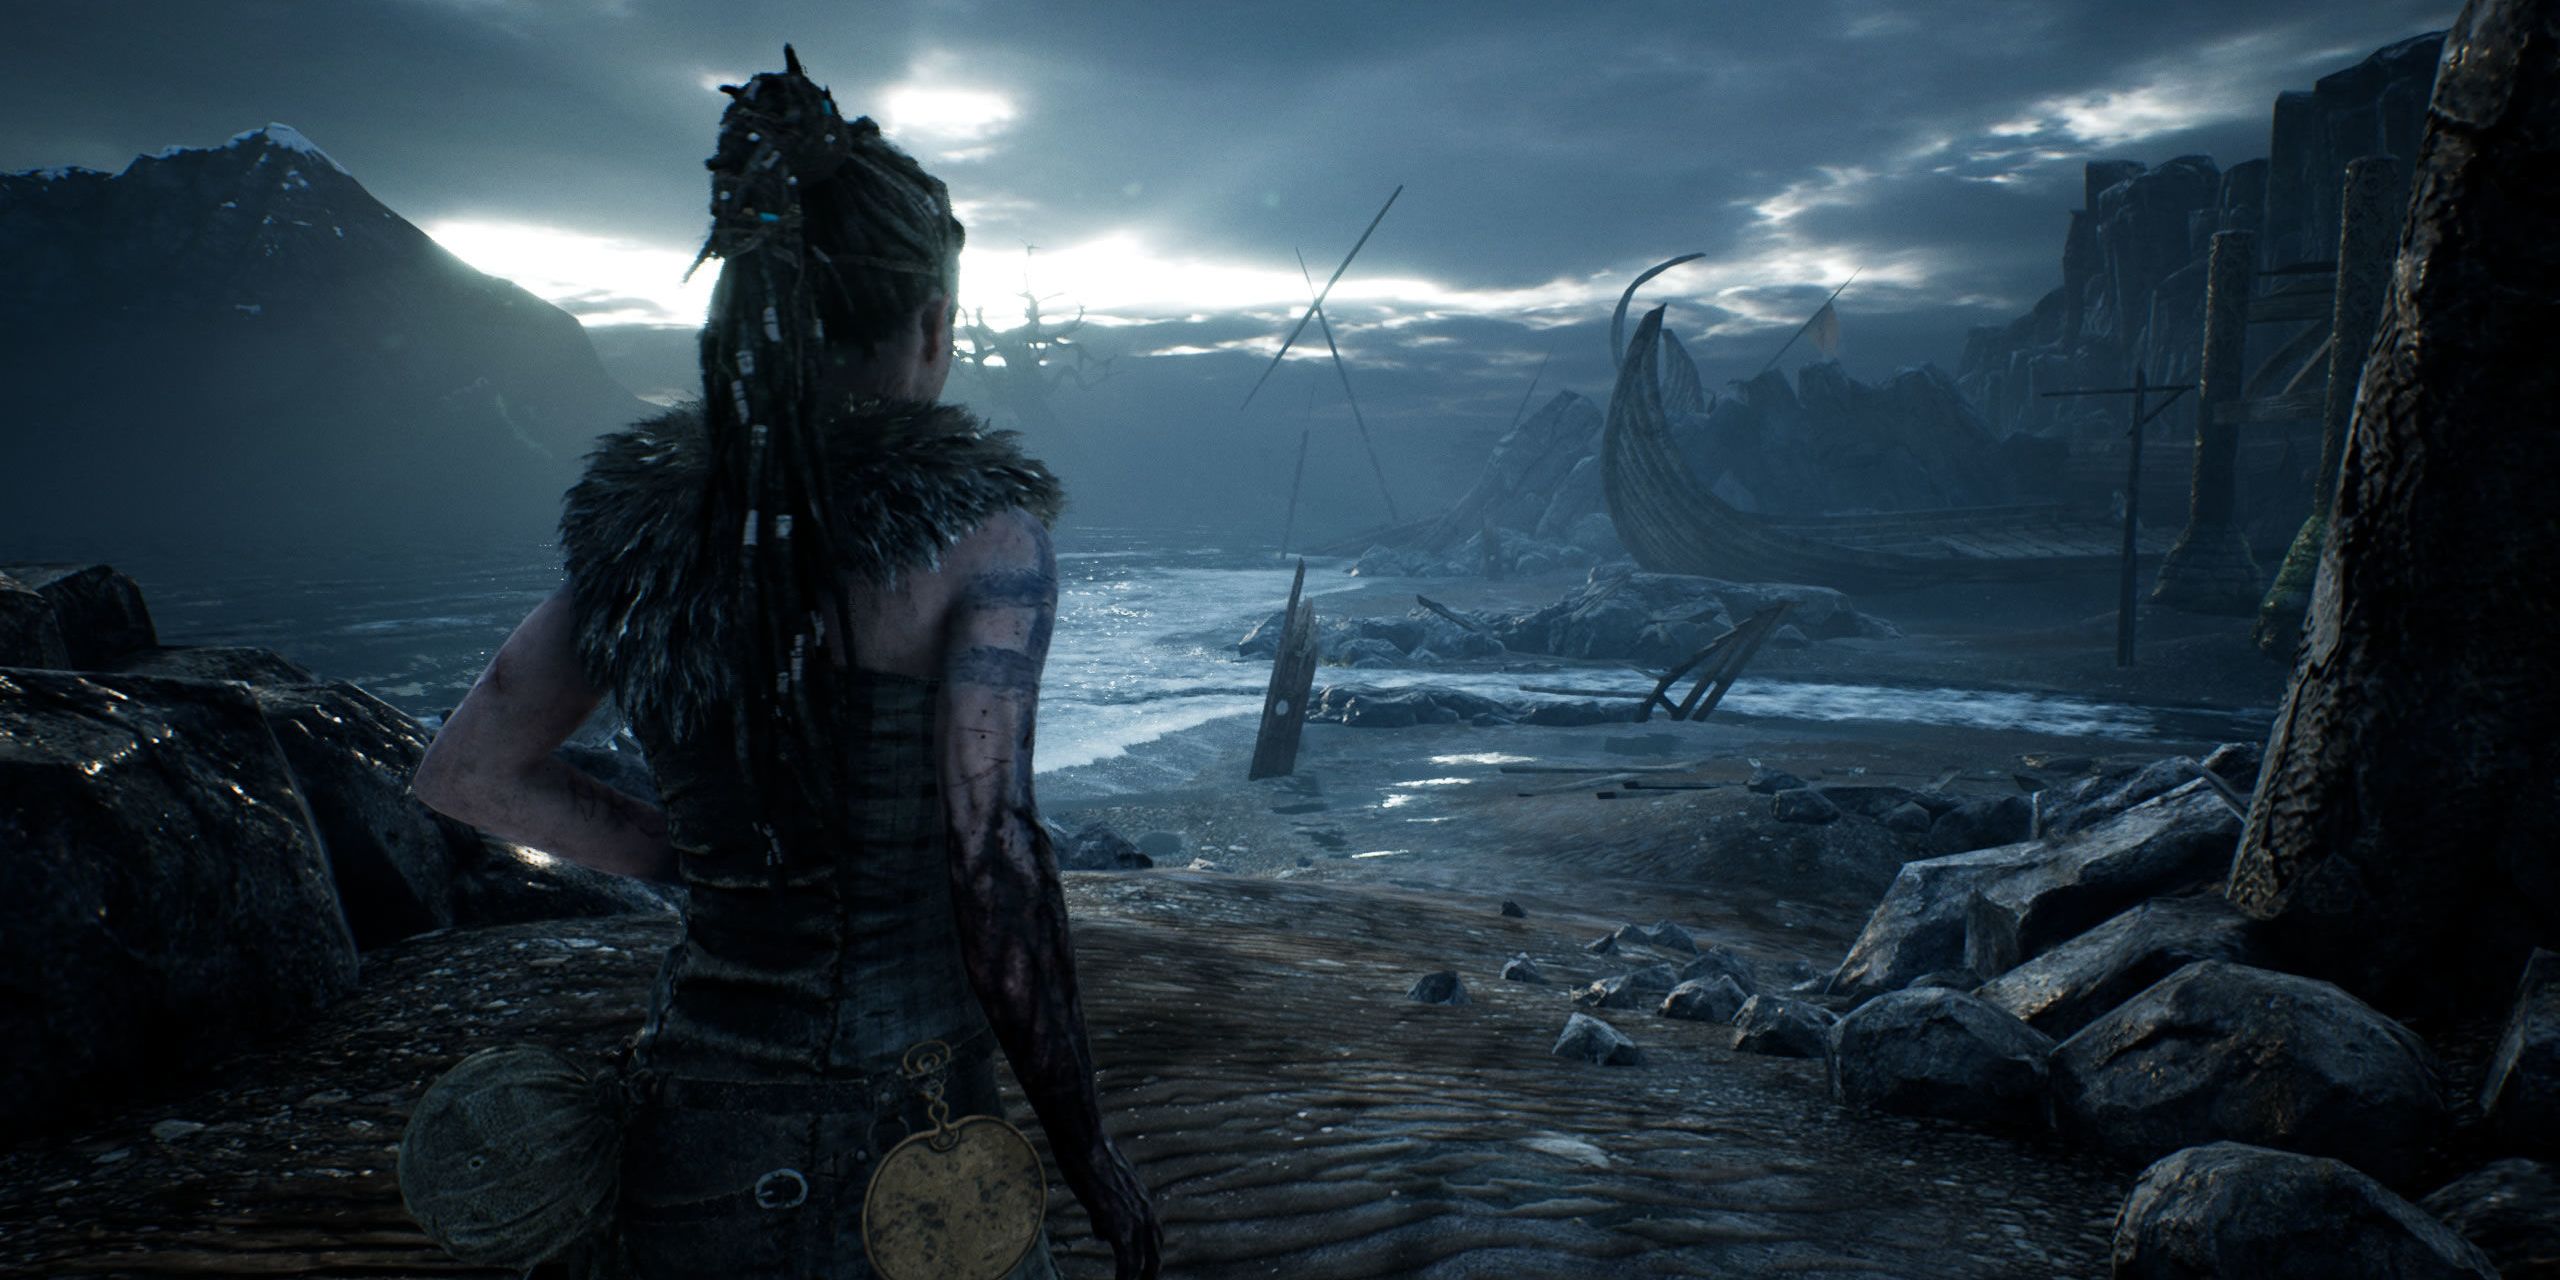 Hellblade Senua Walks Through The Empty Afterlife Full Of Ruins And Shipwrecks 